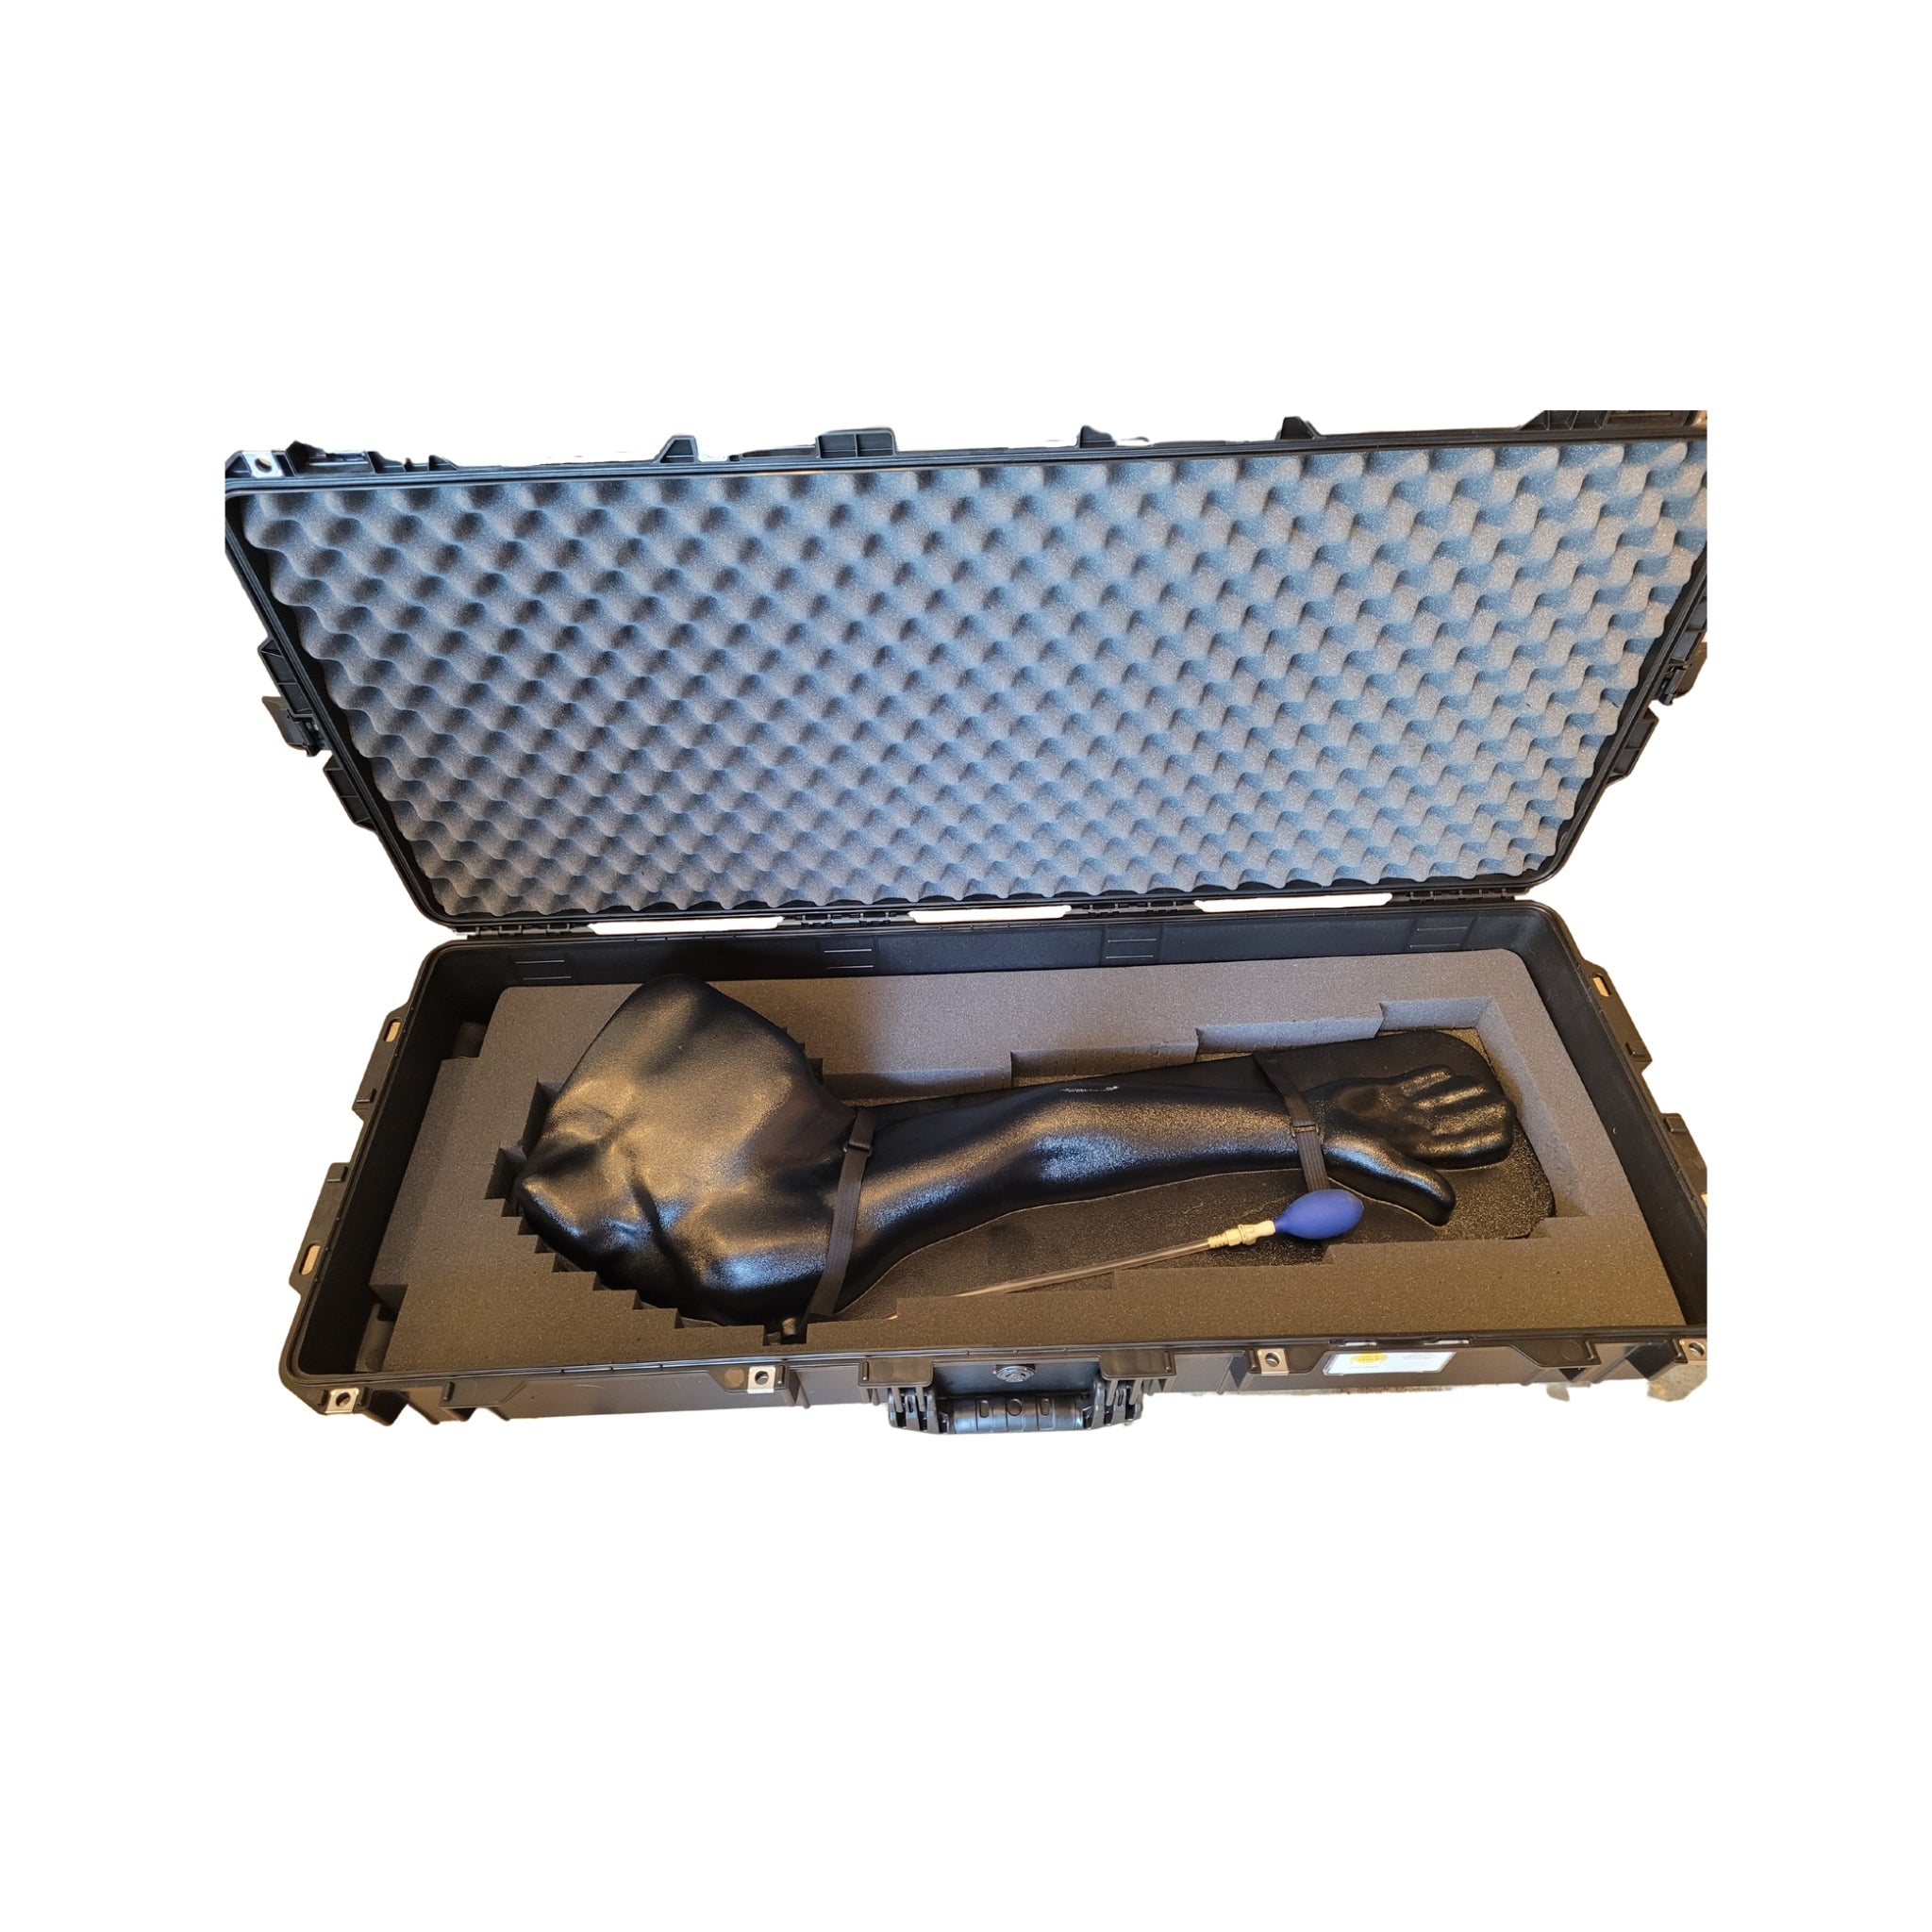 Hard Case for Gen II PICC with IV & Arterial Line Vascular Access Ultrasound Trainer SS1049 | Sim & Skills